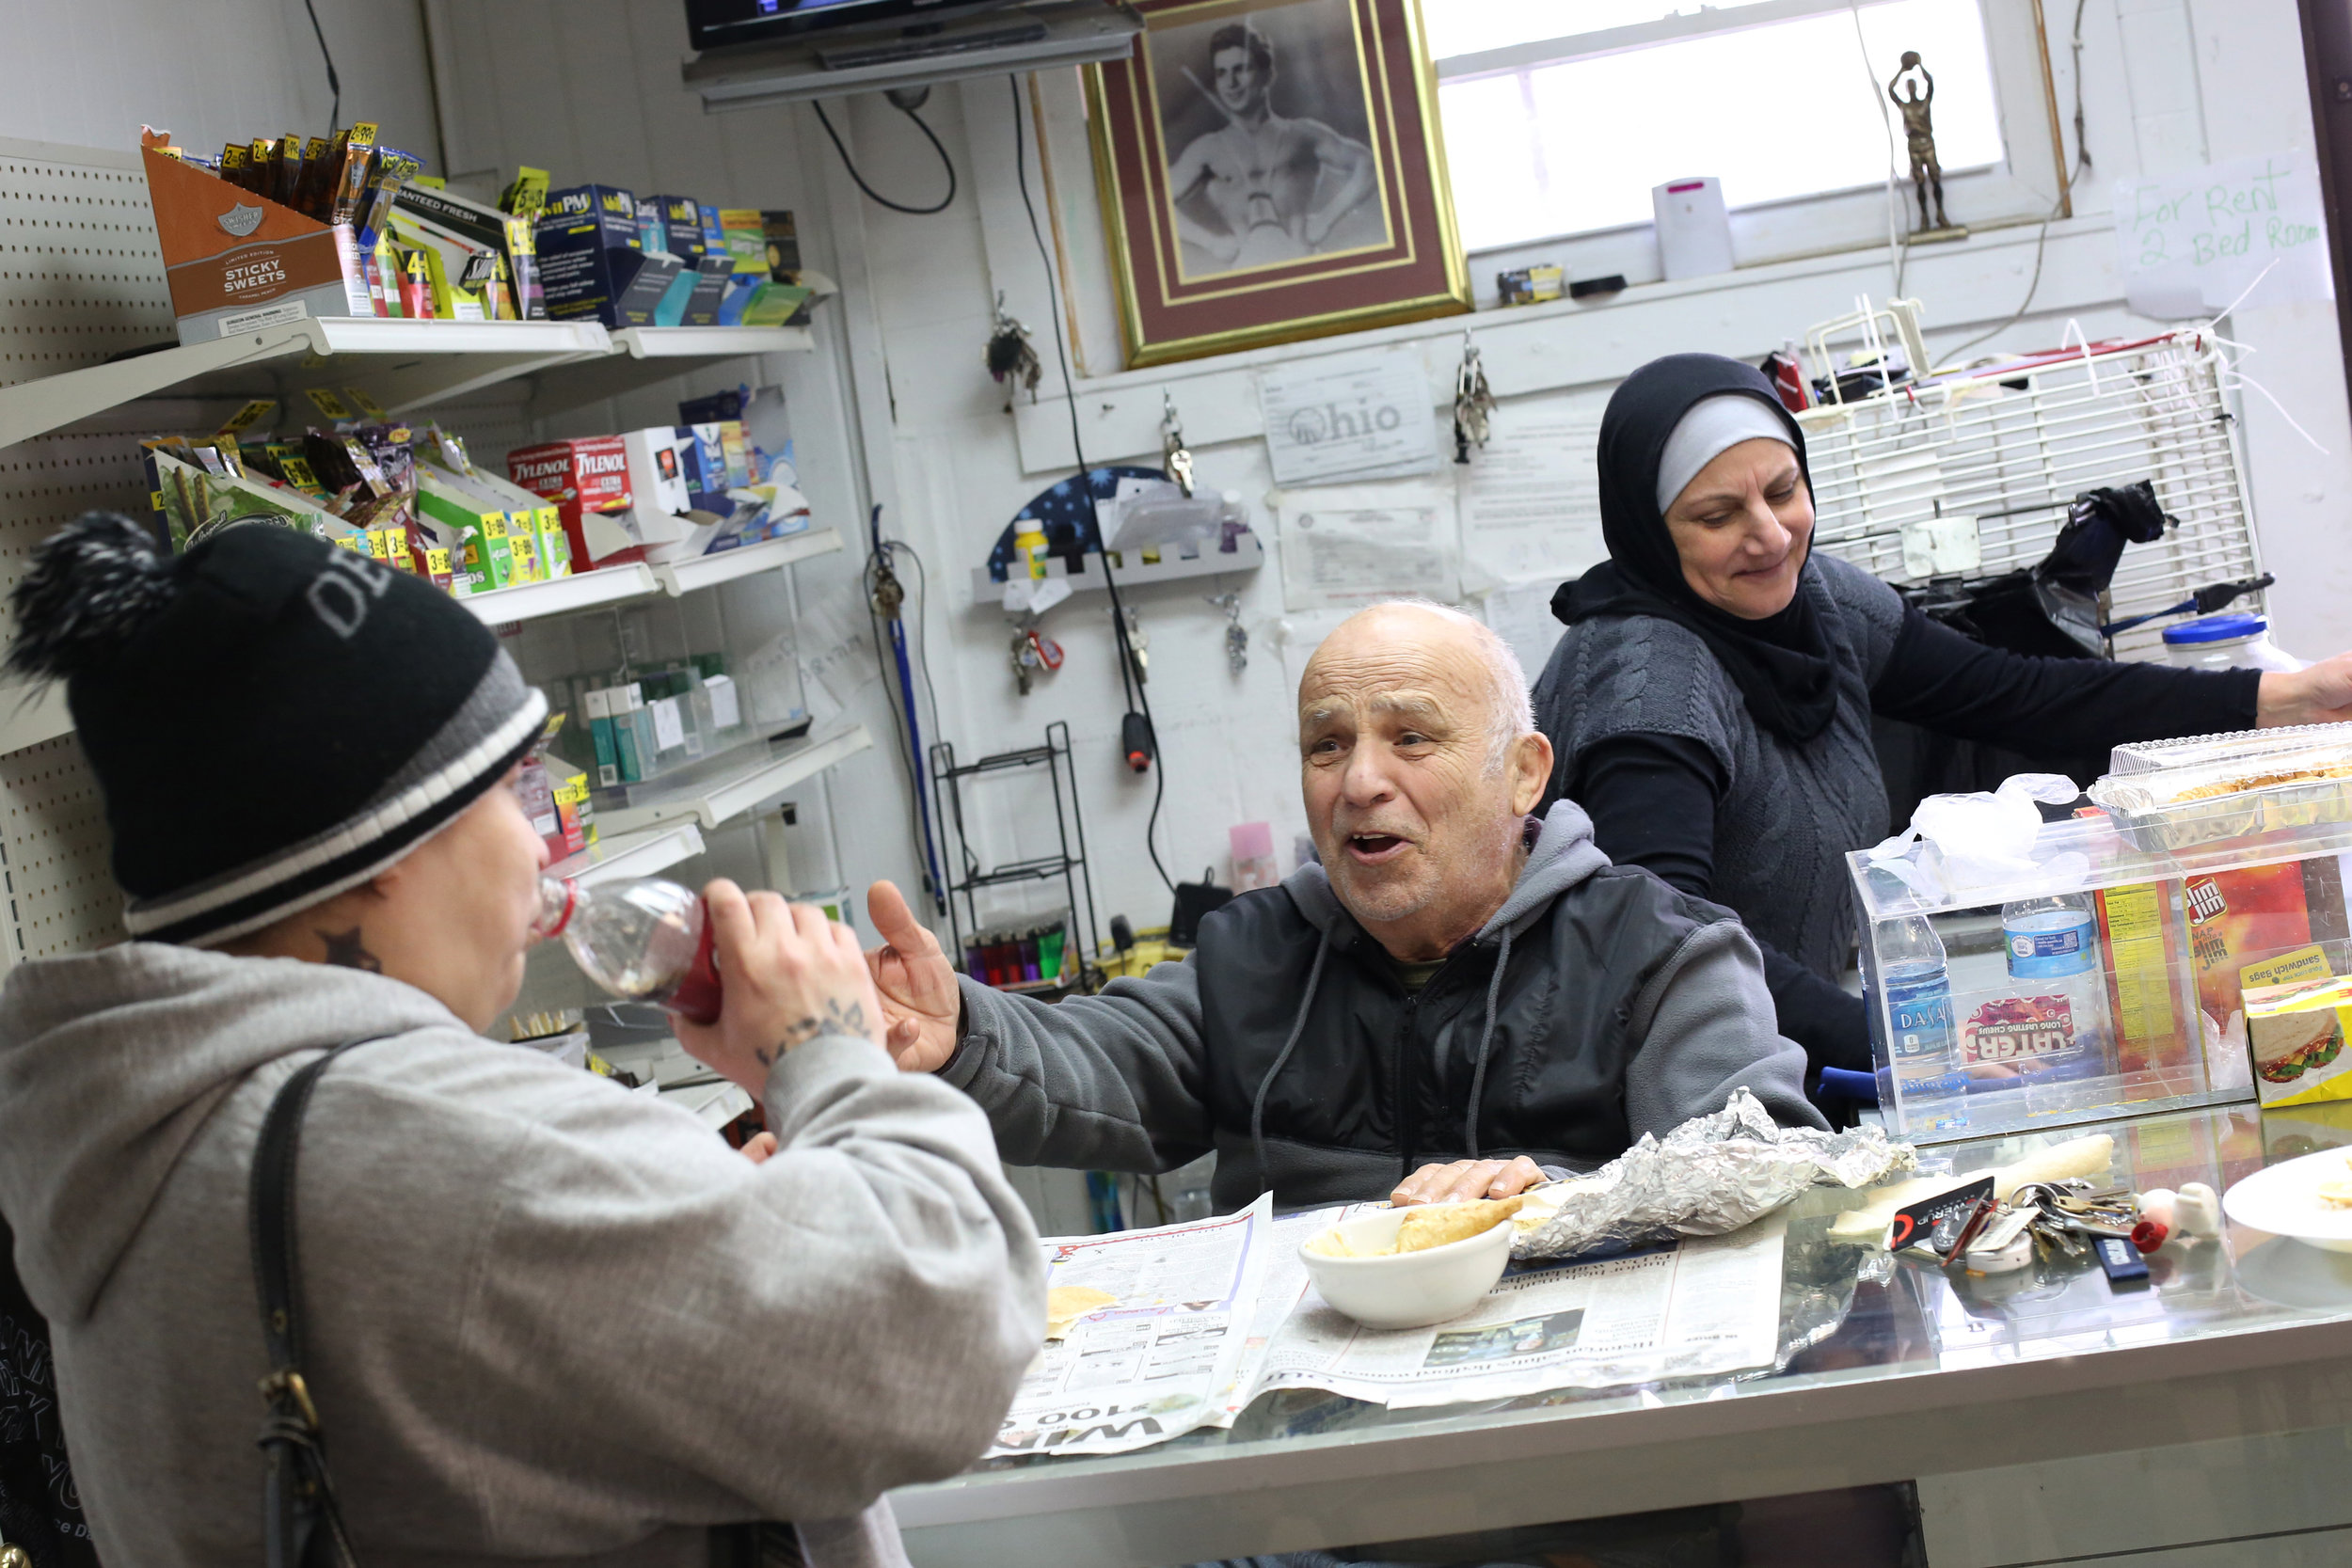  Customer Teresa Flores, a lifelong resident of the North End, left, laughs as she jokes with Hassan Cheaib, 81, as they share the lunch his wife Khadije brought to the Cheaib's carry-out store. Ms. Flores said she often goes out of her way to stop b